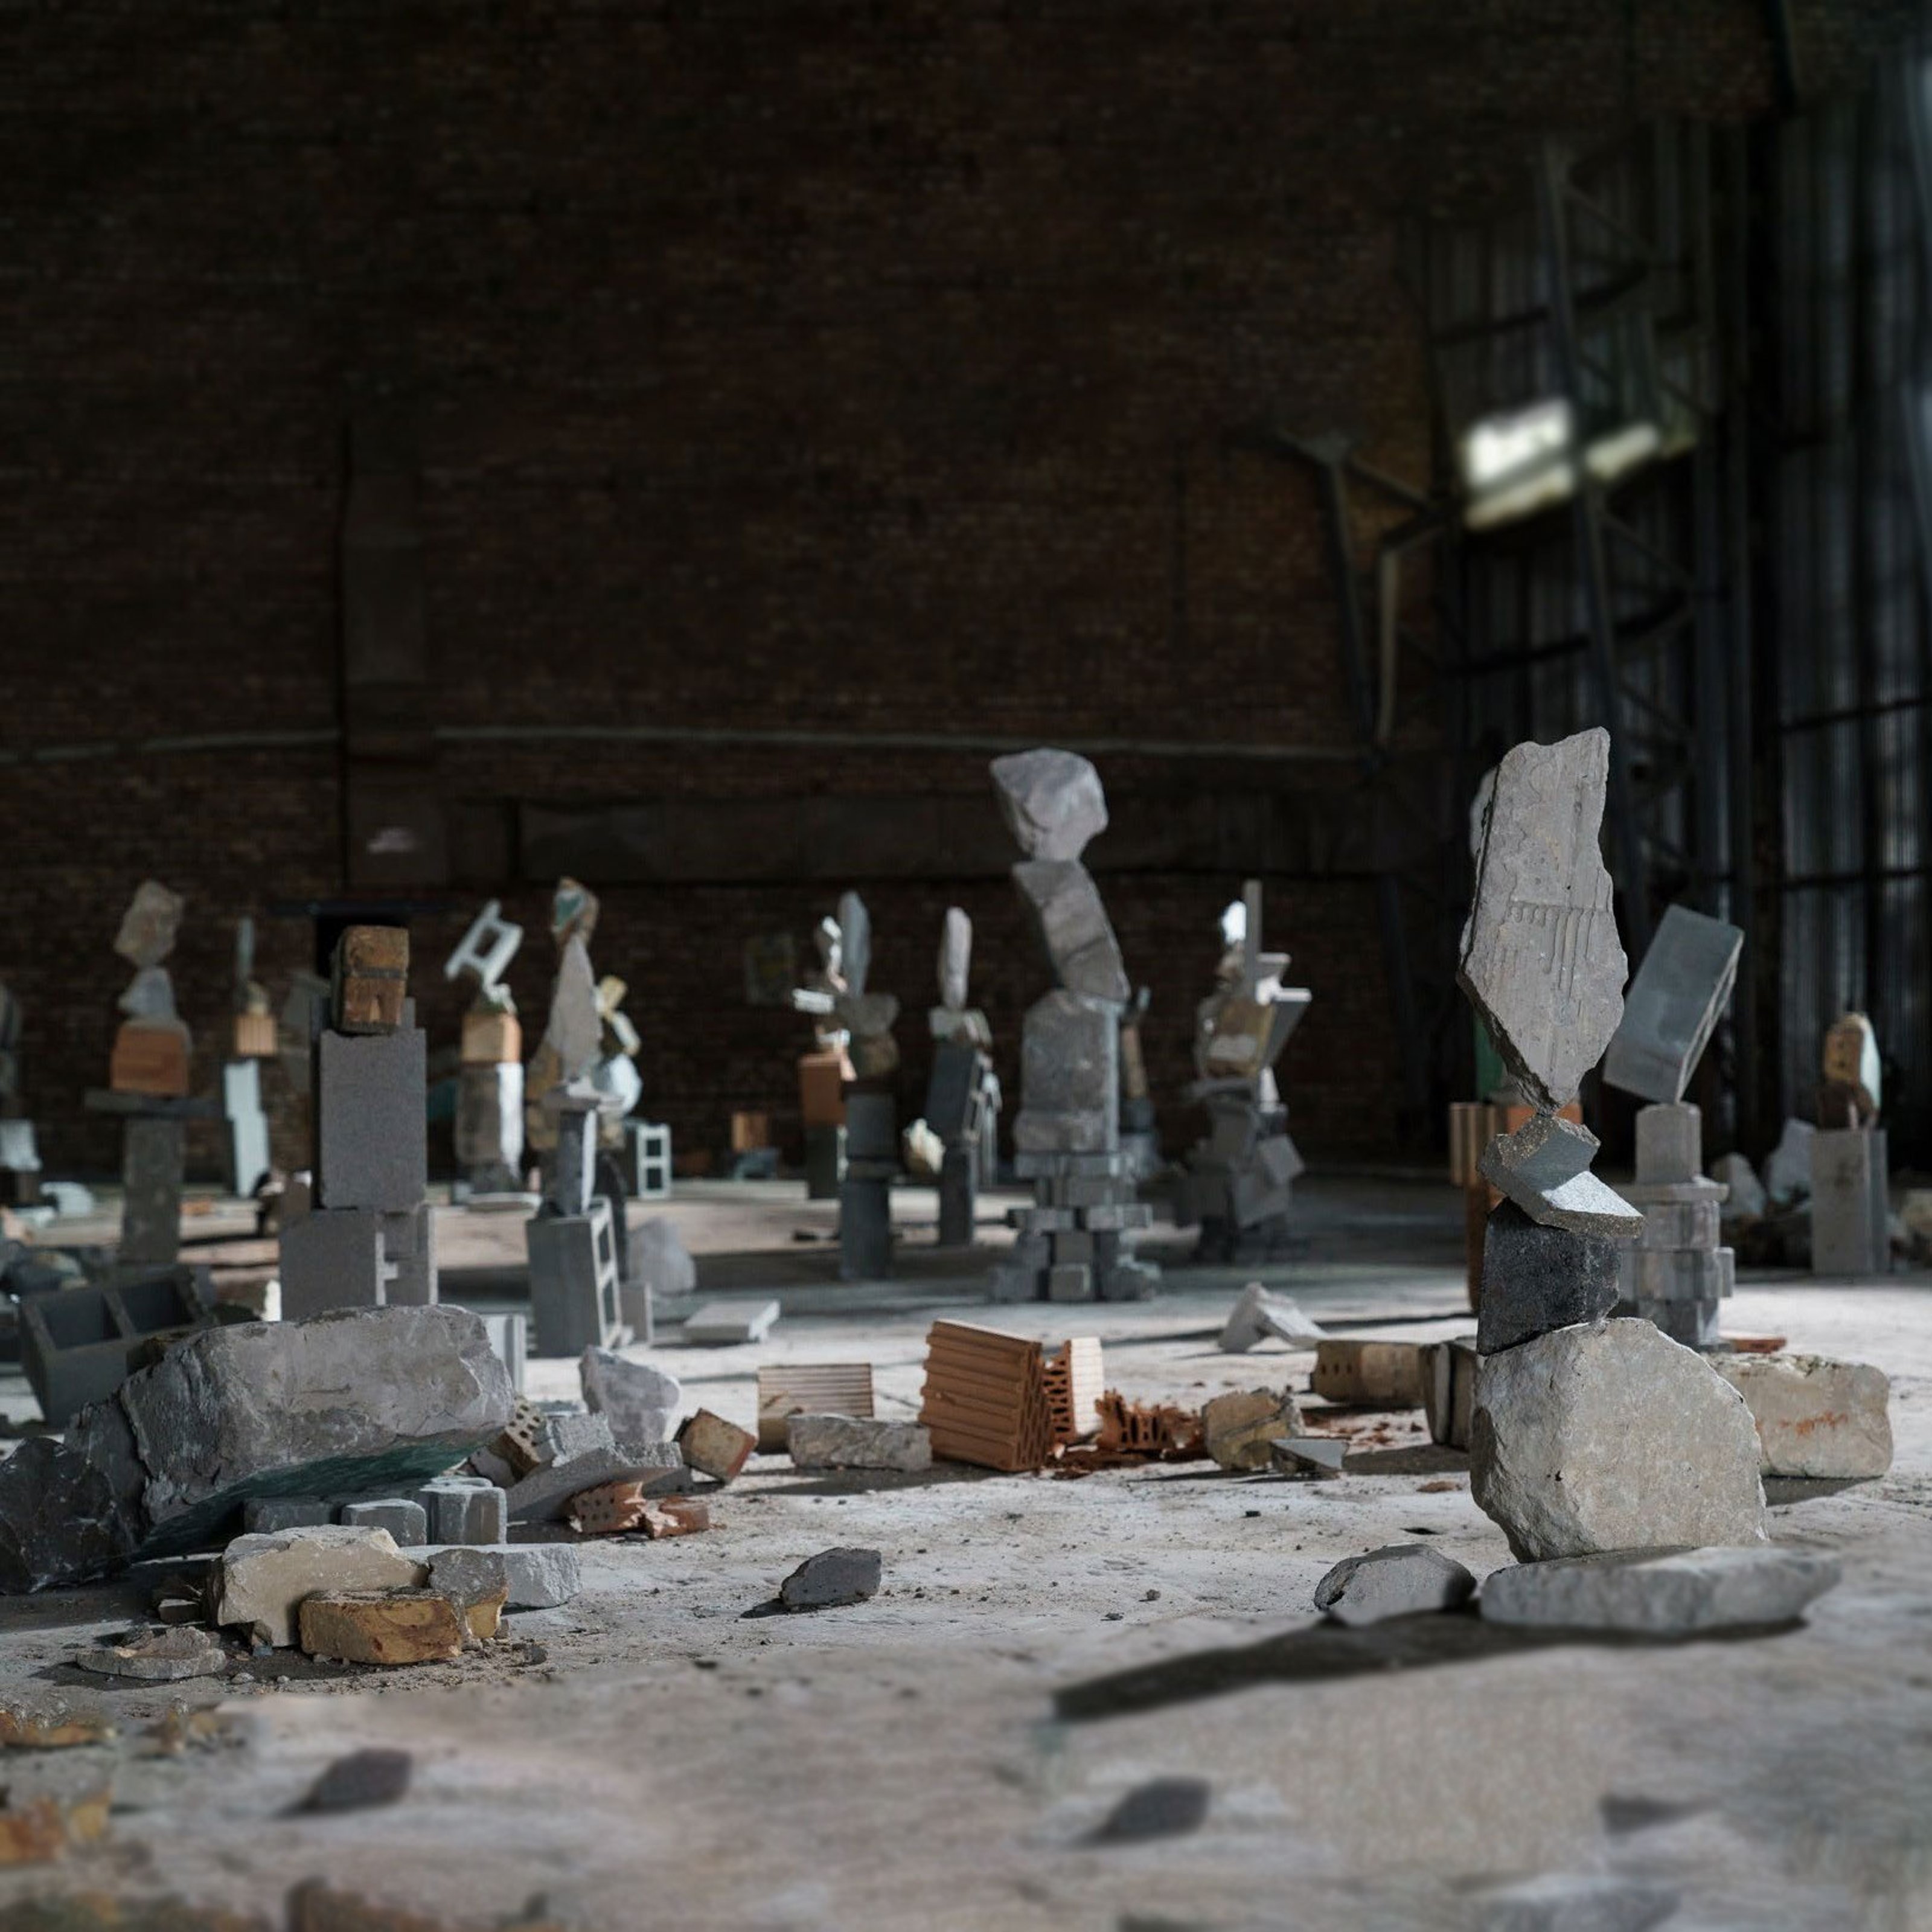 It is an installation of stones mounted one above the other, placed on the floor of an old, concrete, large space.